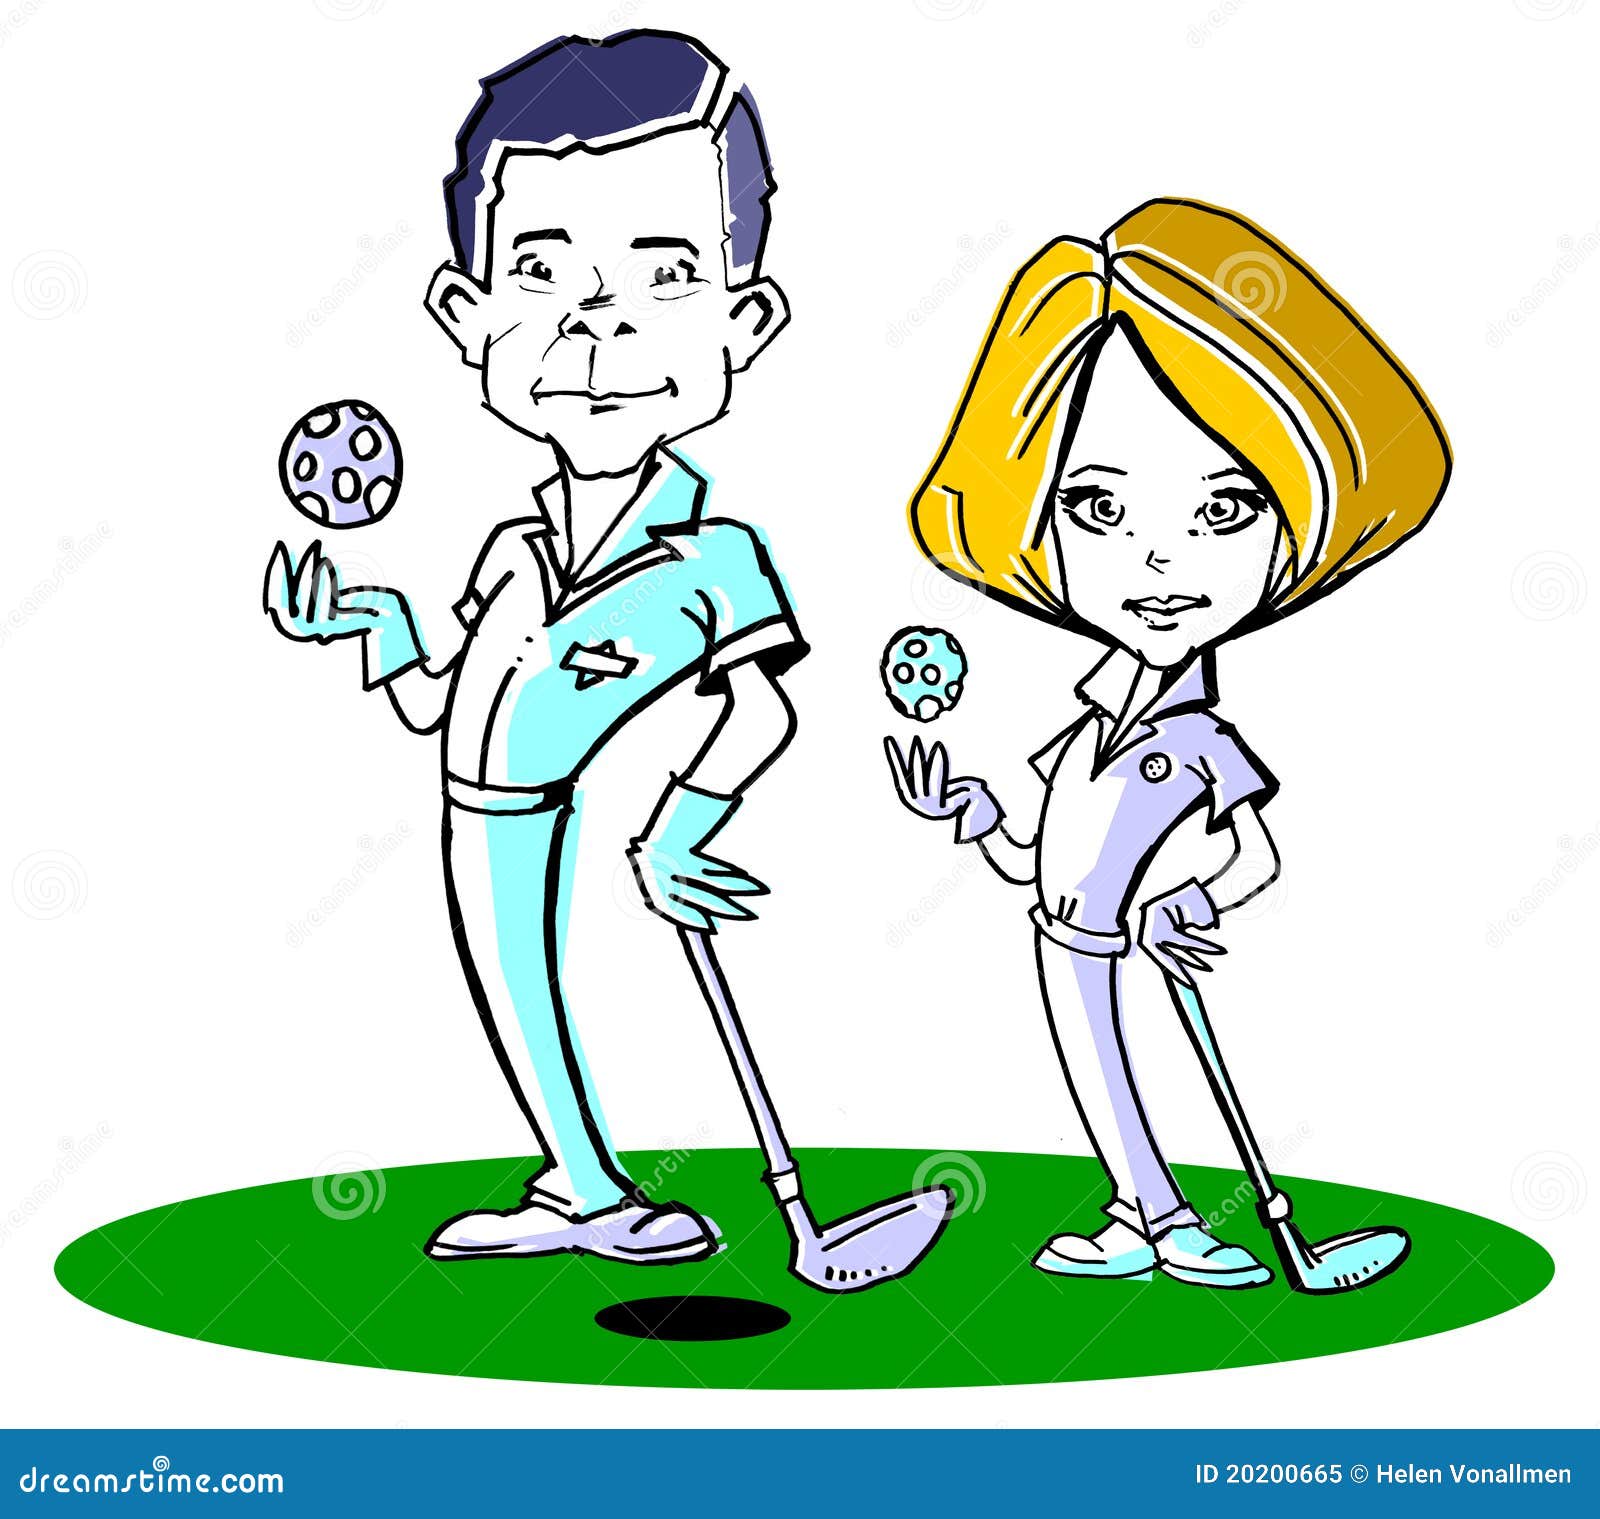 golf clipart free download - photo #32